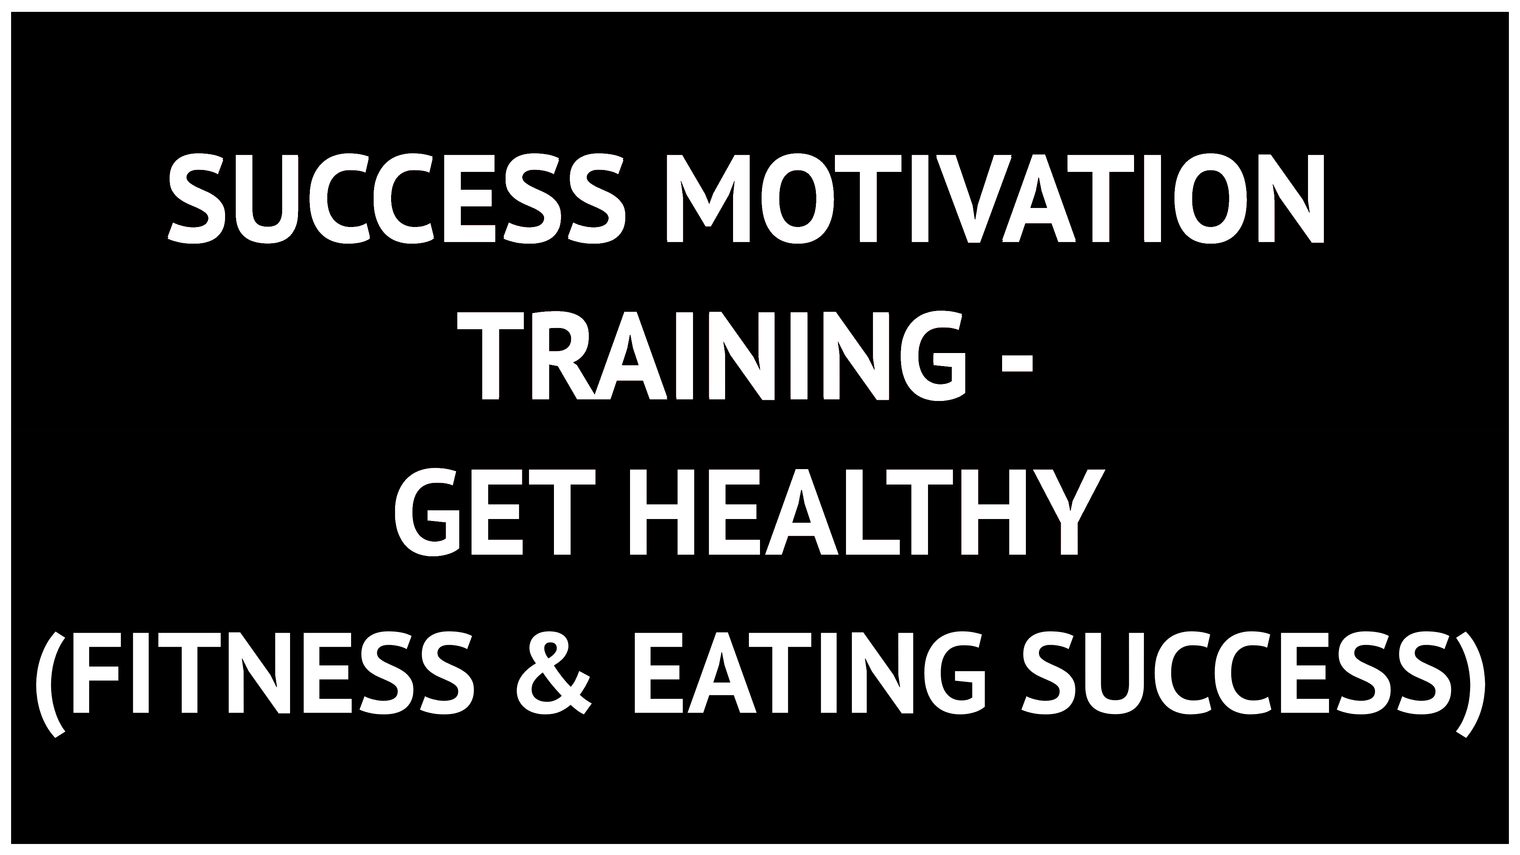 Success Motivation Training - Get Healthy (Fitness & Eating Success)